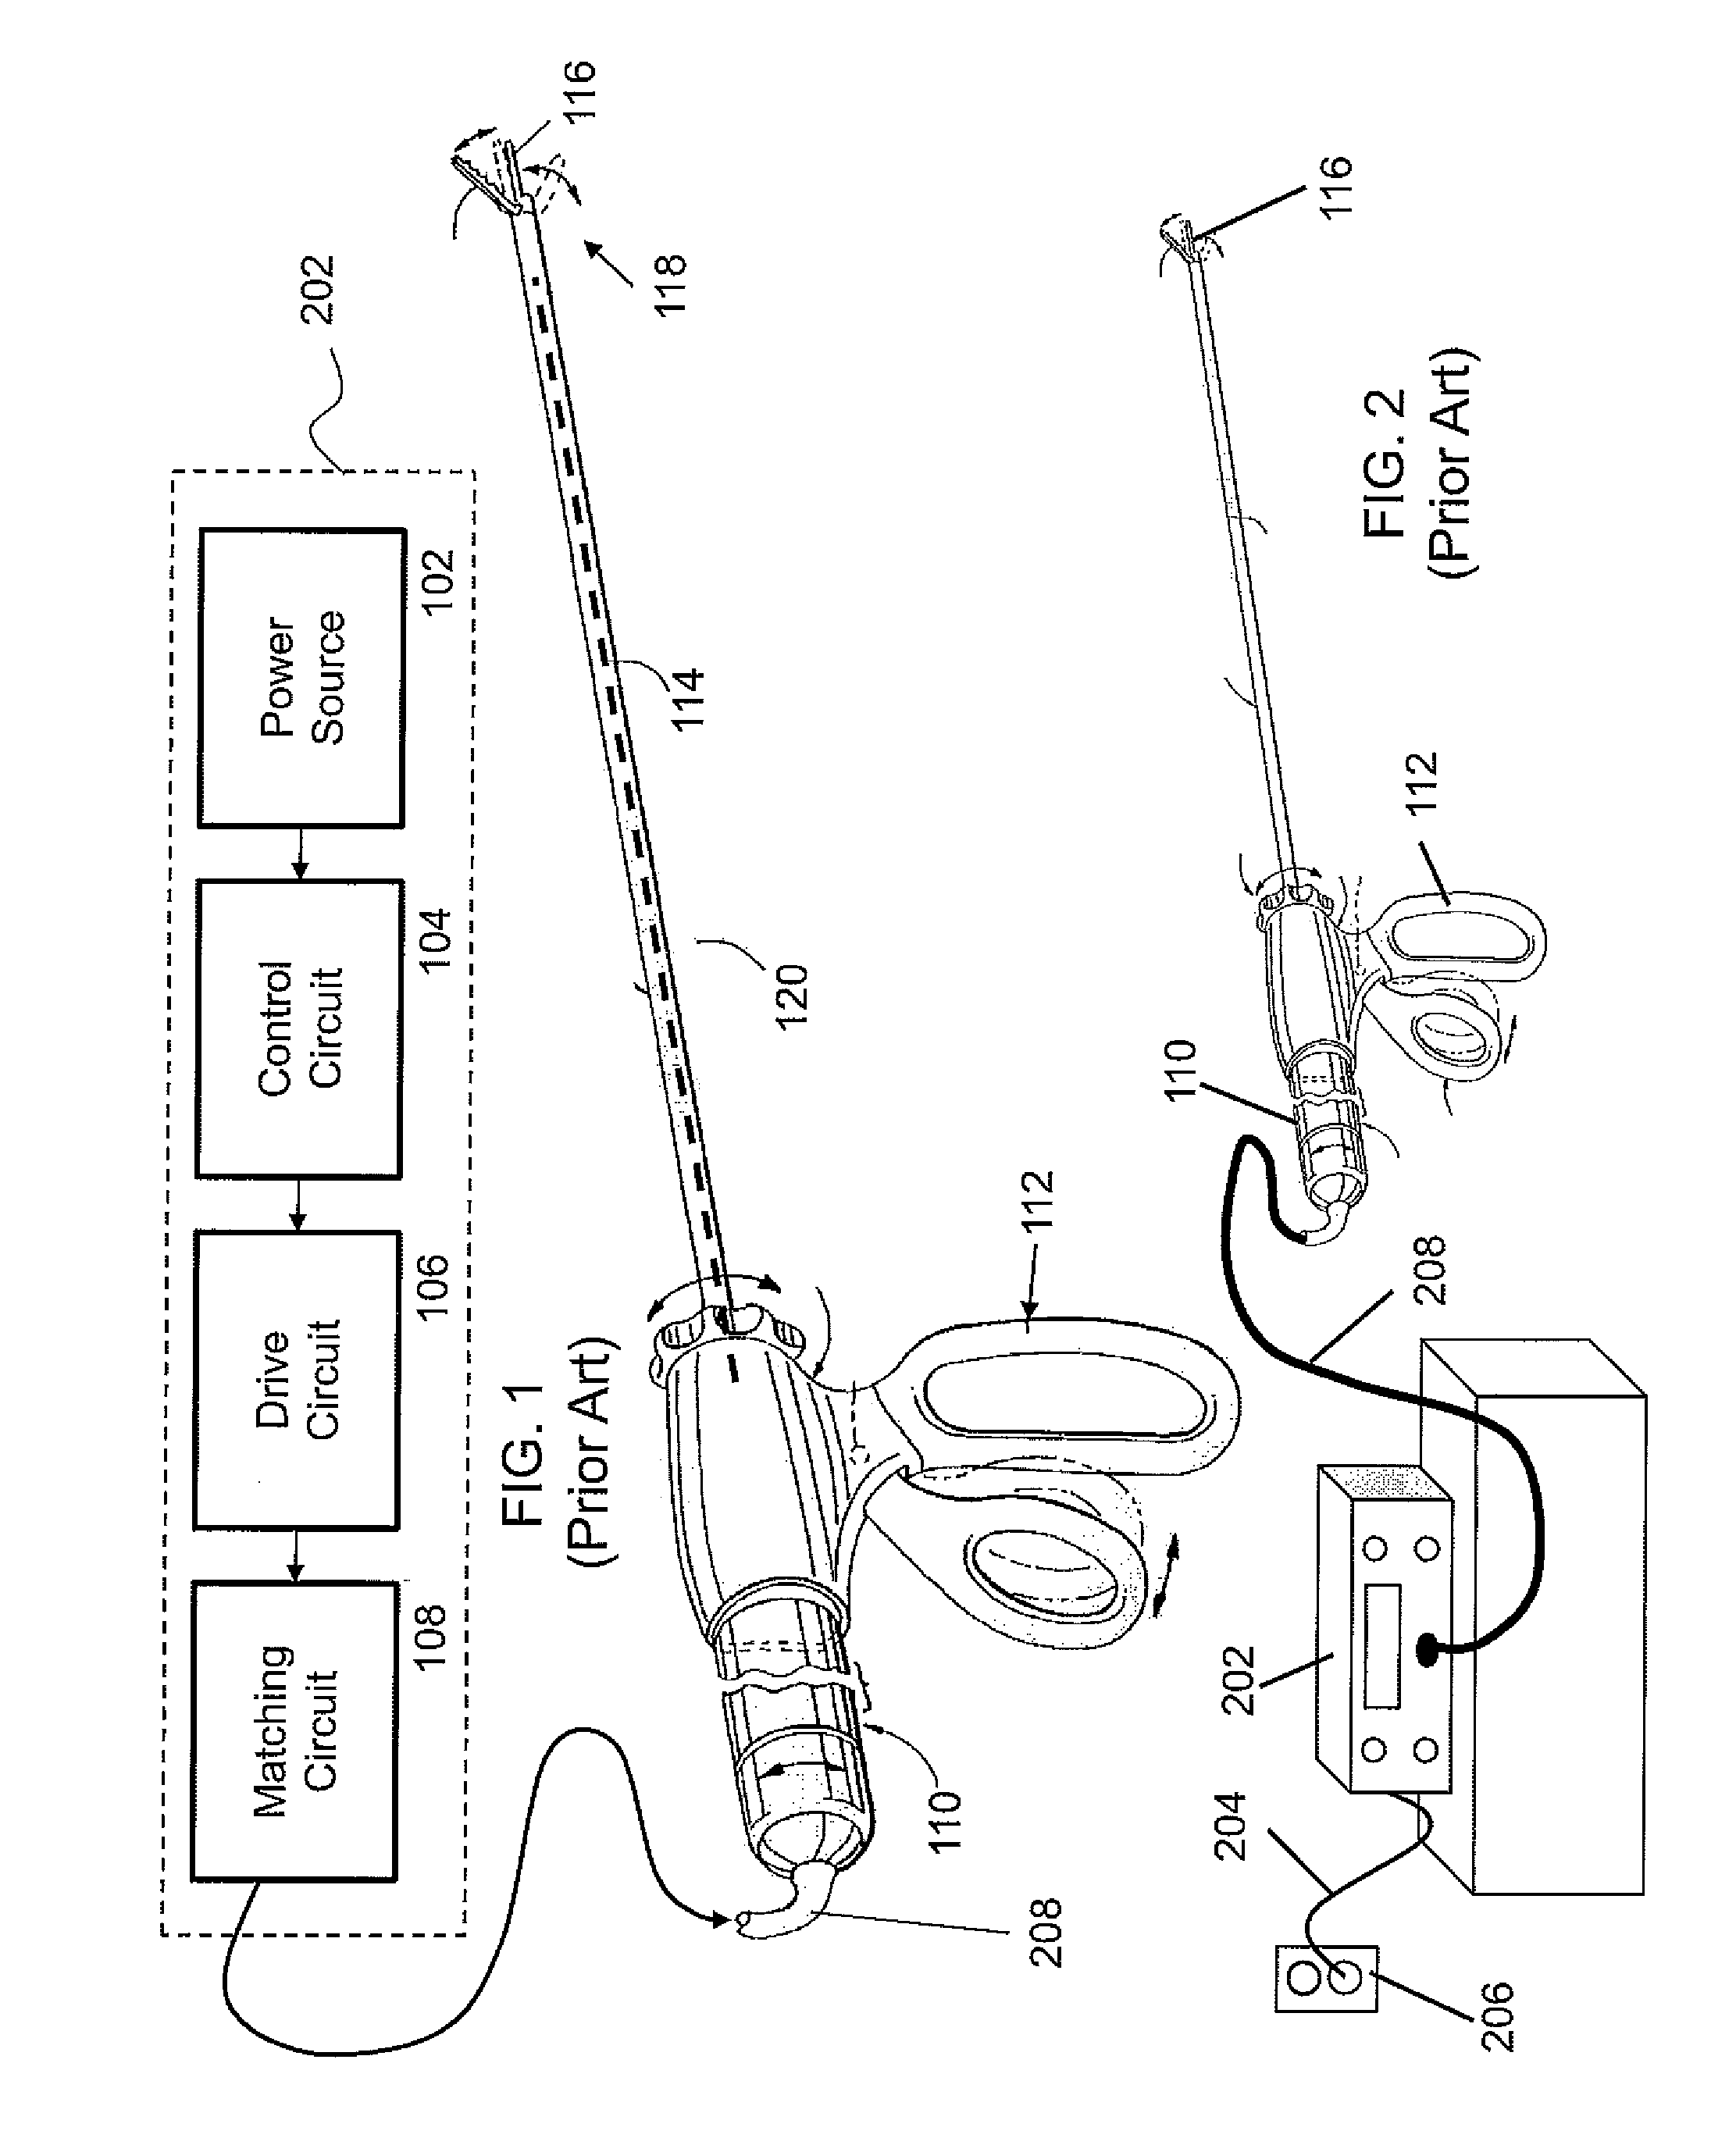 Battery-powered hand-held ultrasonic surgical cautery cutting device